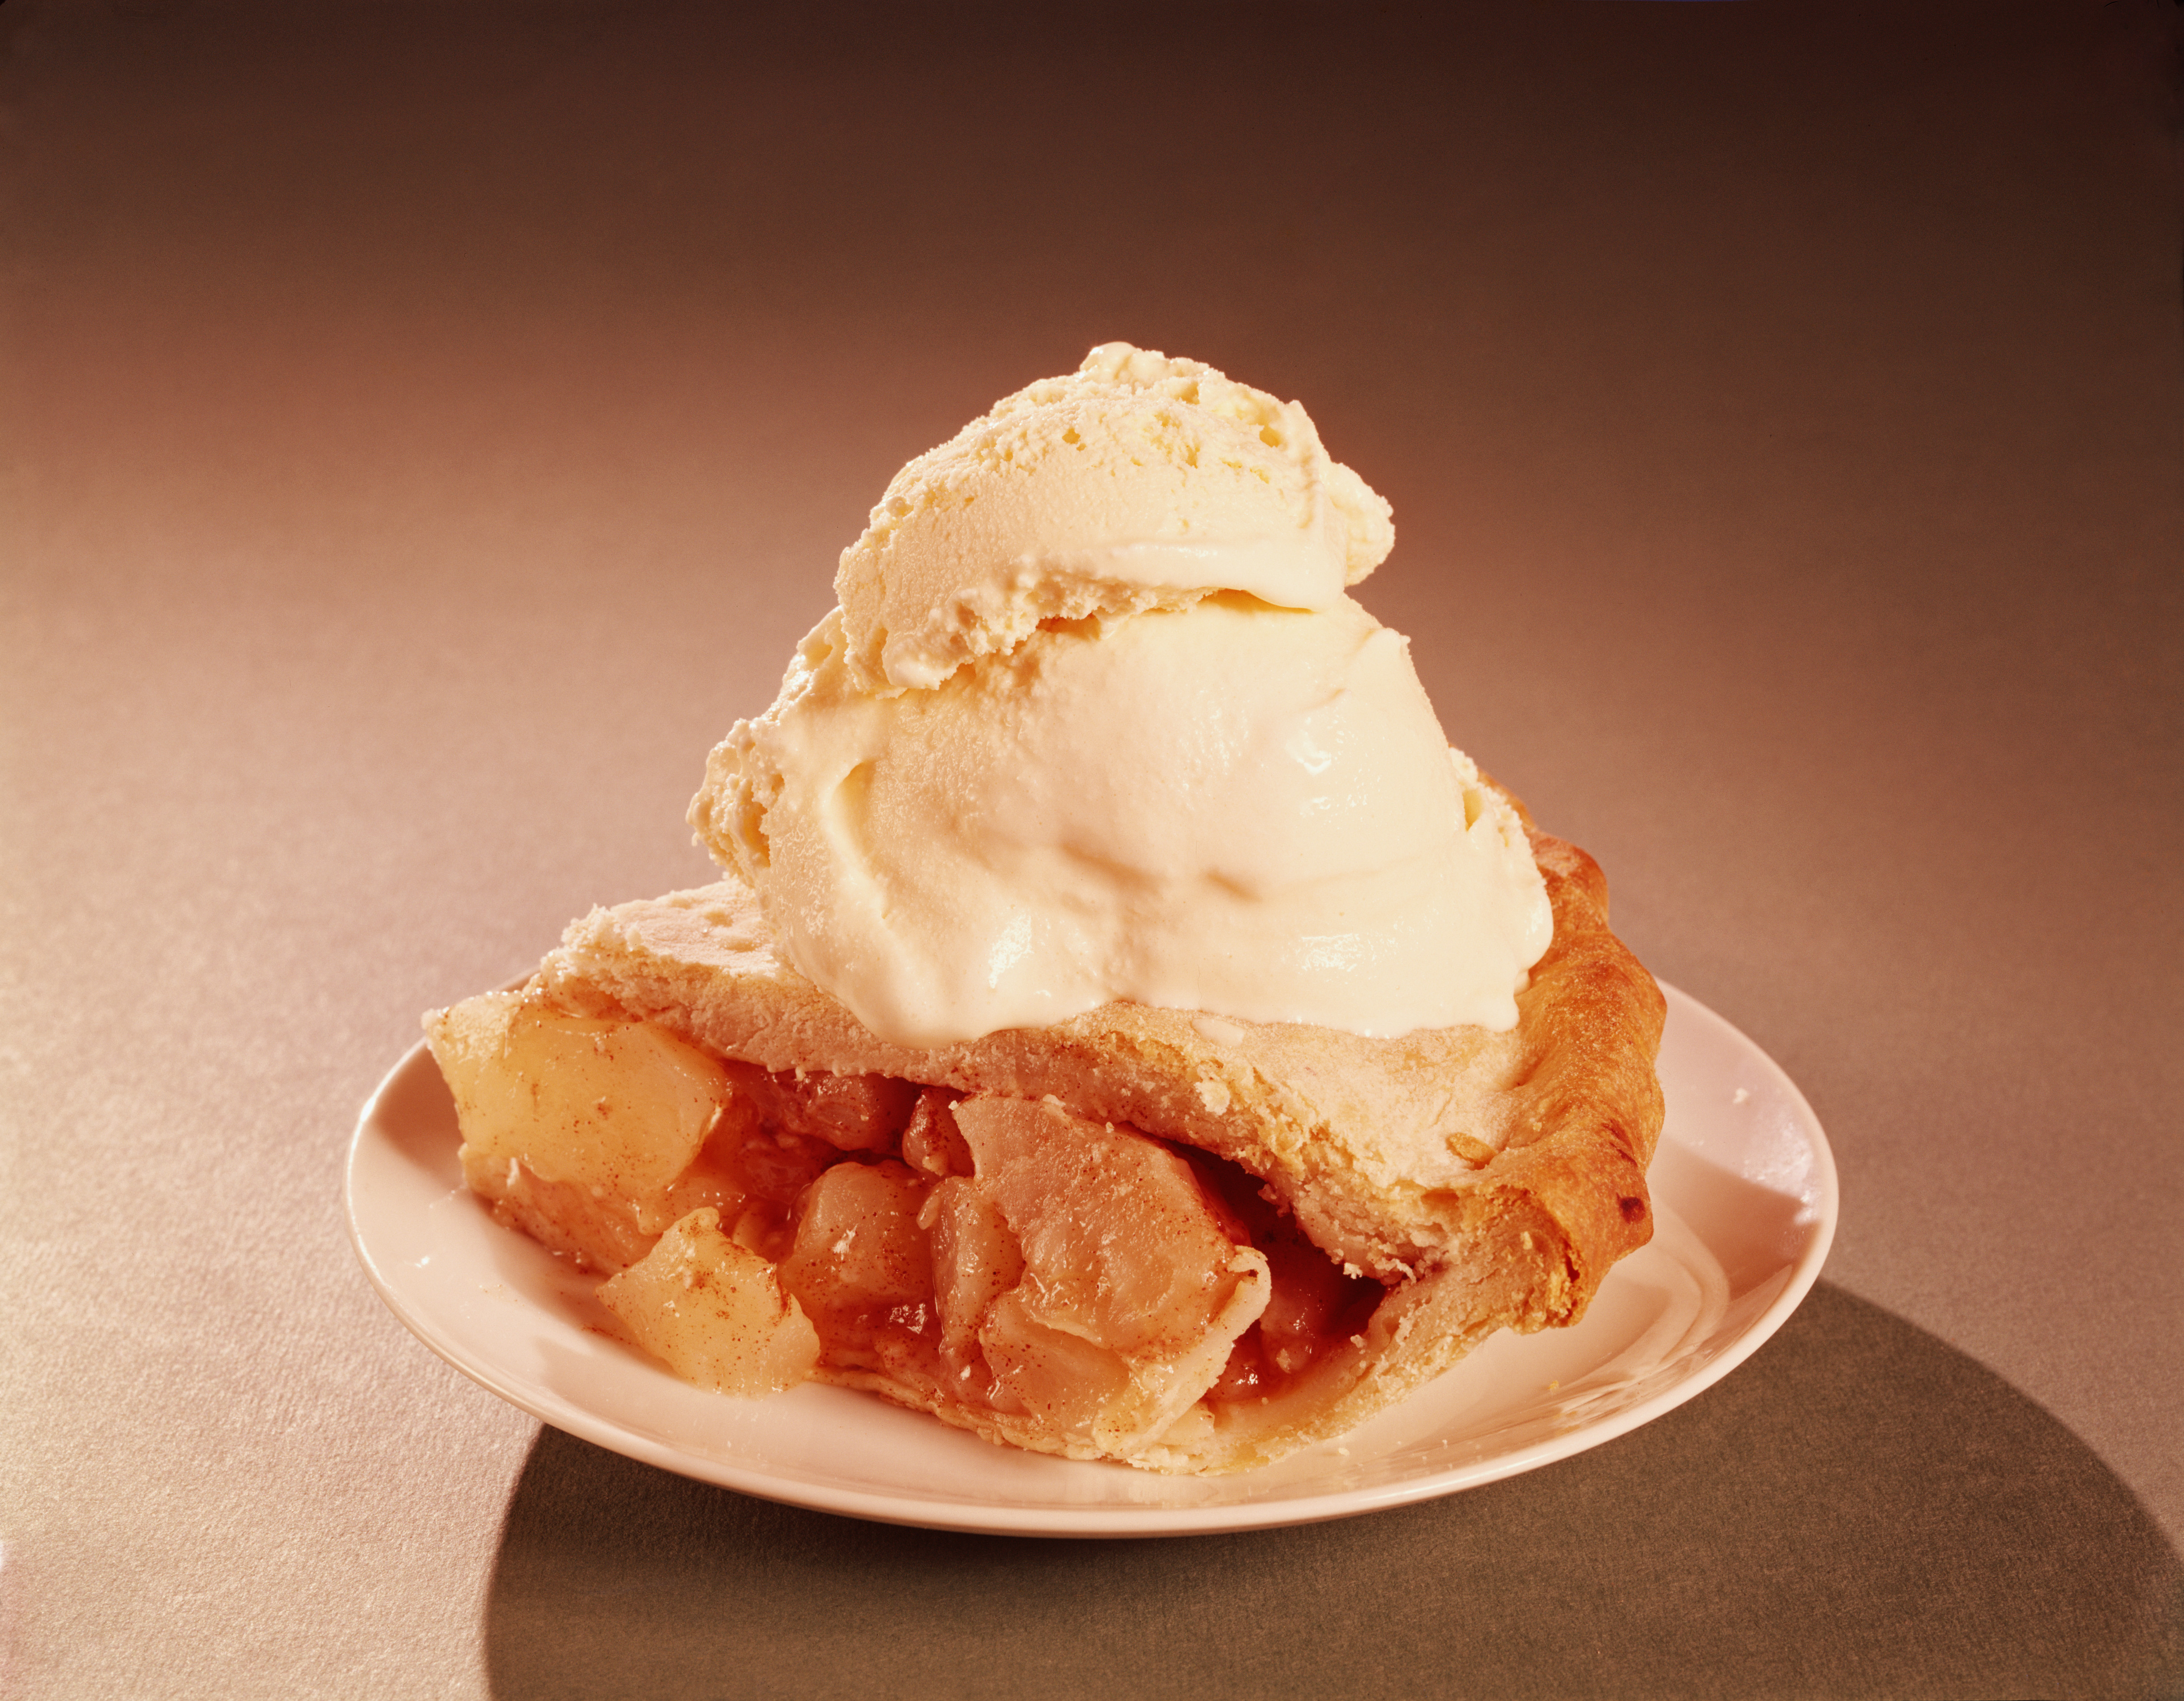 Retro-style image of a slice of apple pie with vanilla ice cream on top, on a plate.